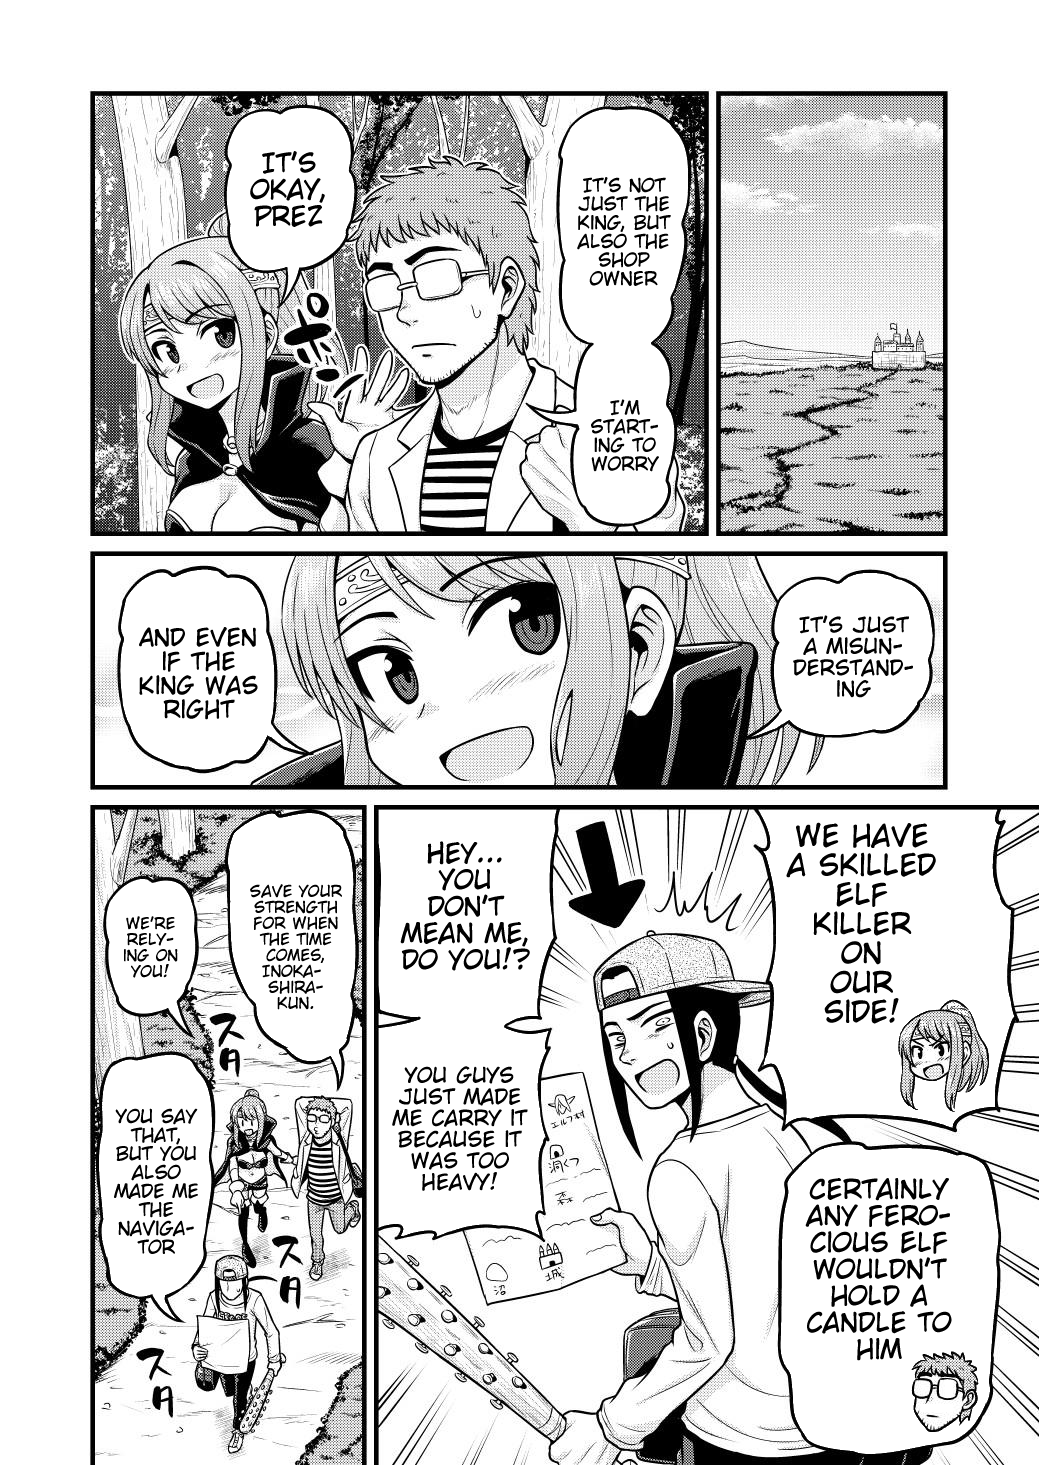 Filming Adult Videos in Another World - Chapter 3 Page 11